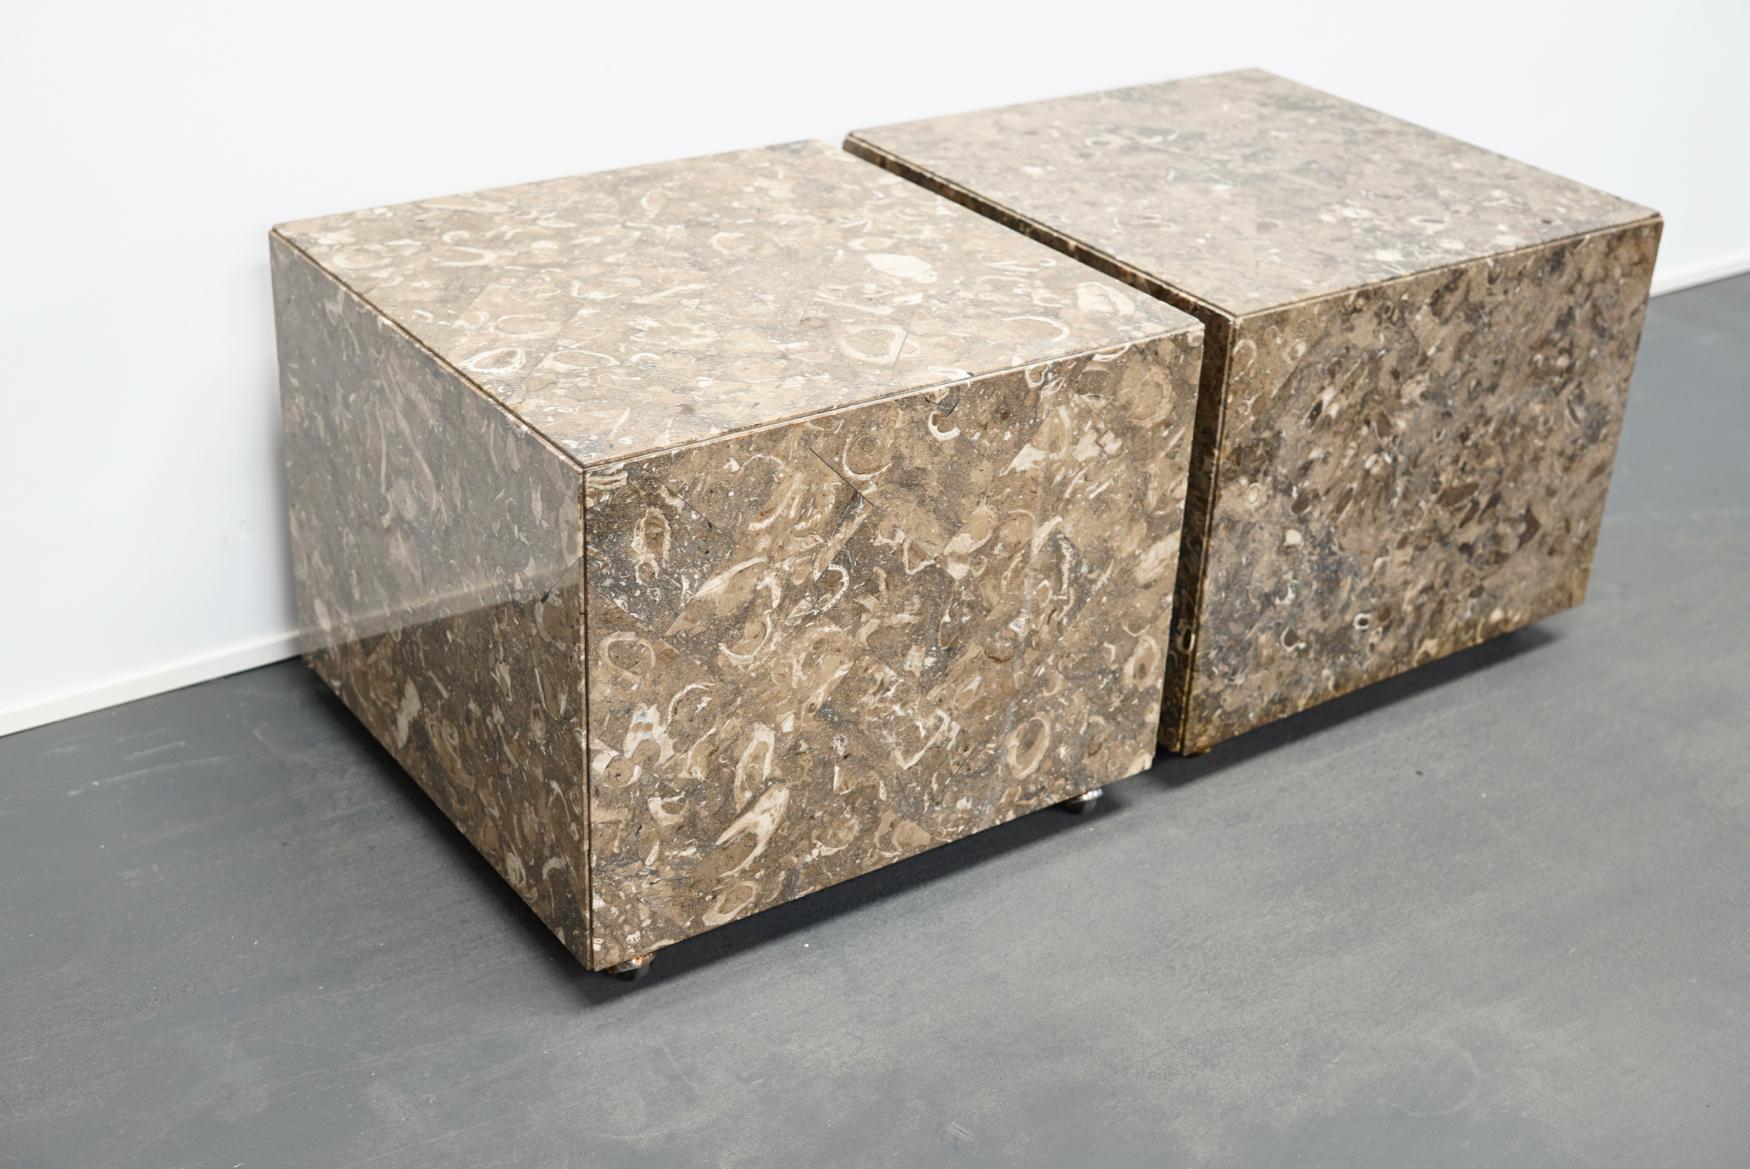 This pair of decorative herringbone pattern marble or fossil tiled side tables with concealed casters were designed and made around the 1970s in Italy. The marble cubes have some small chips around the edges.